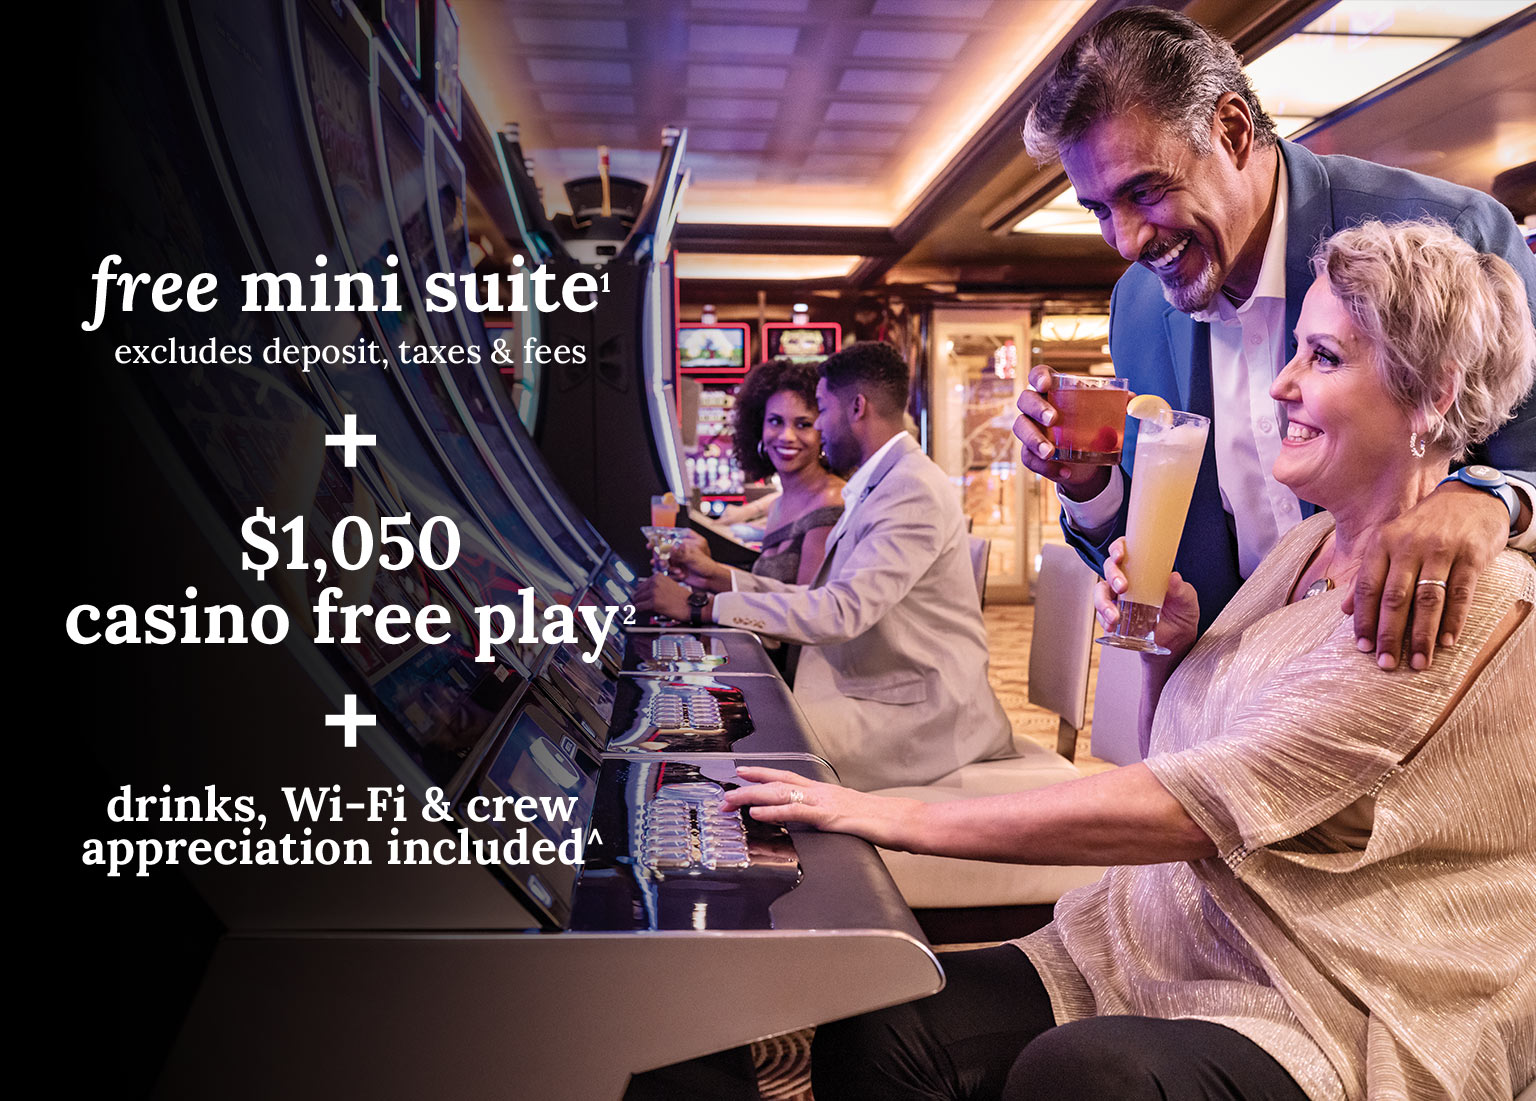 free mini-suite + $1,050 casino free play + drinks, Wi-Fi & crew appreciation. Click here to book.